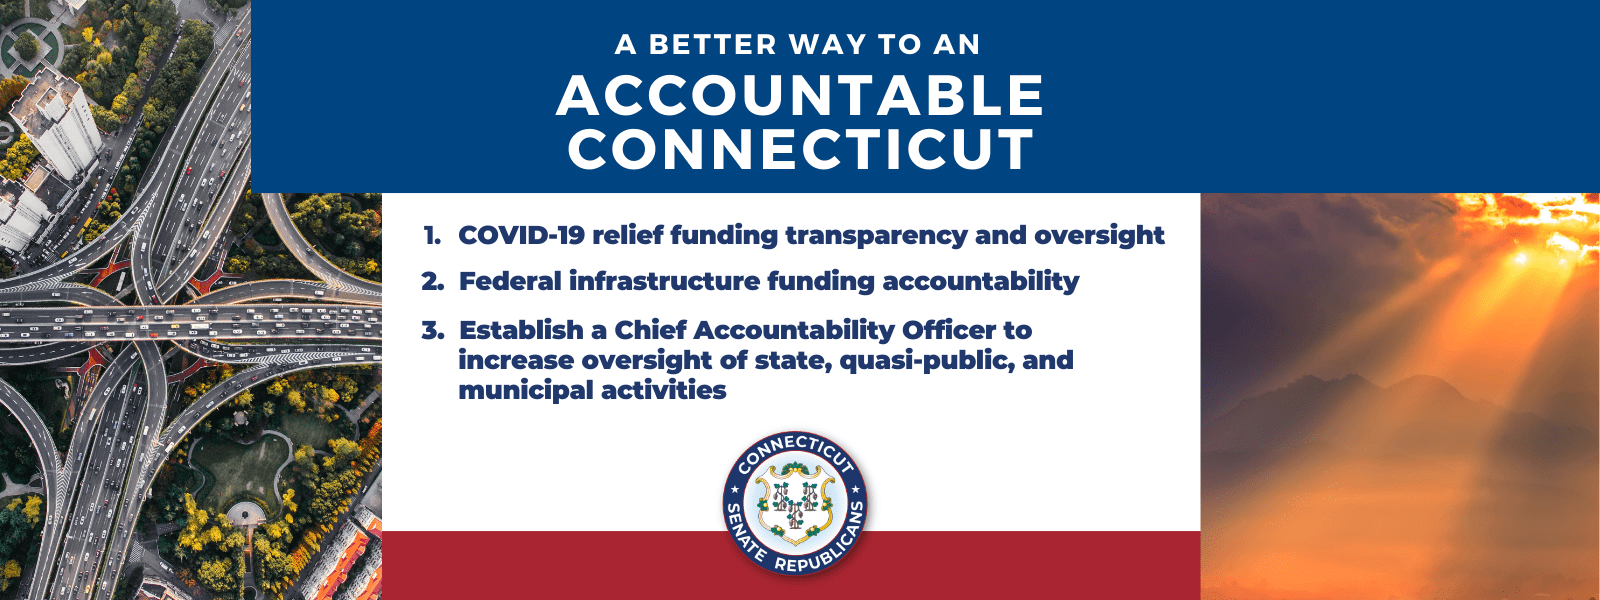 Sen. Gordon Joins Senate Republican Call for Government Transparency & Accountability,  Unveils Better Way to an Accountable CT Plan